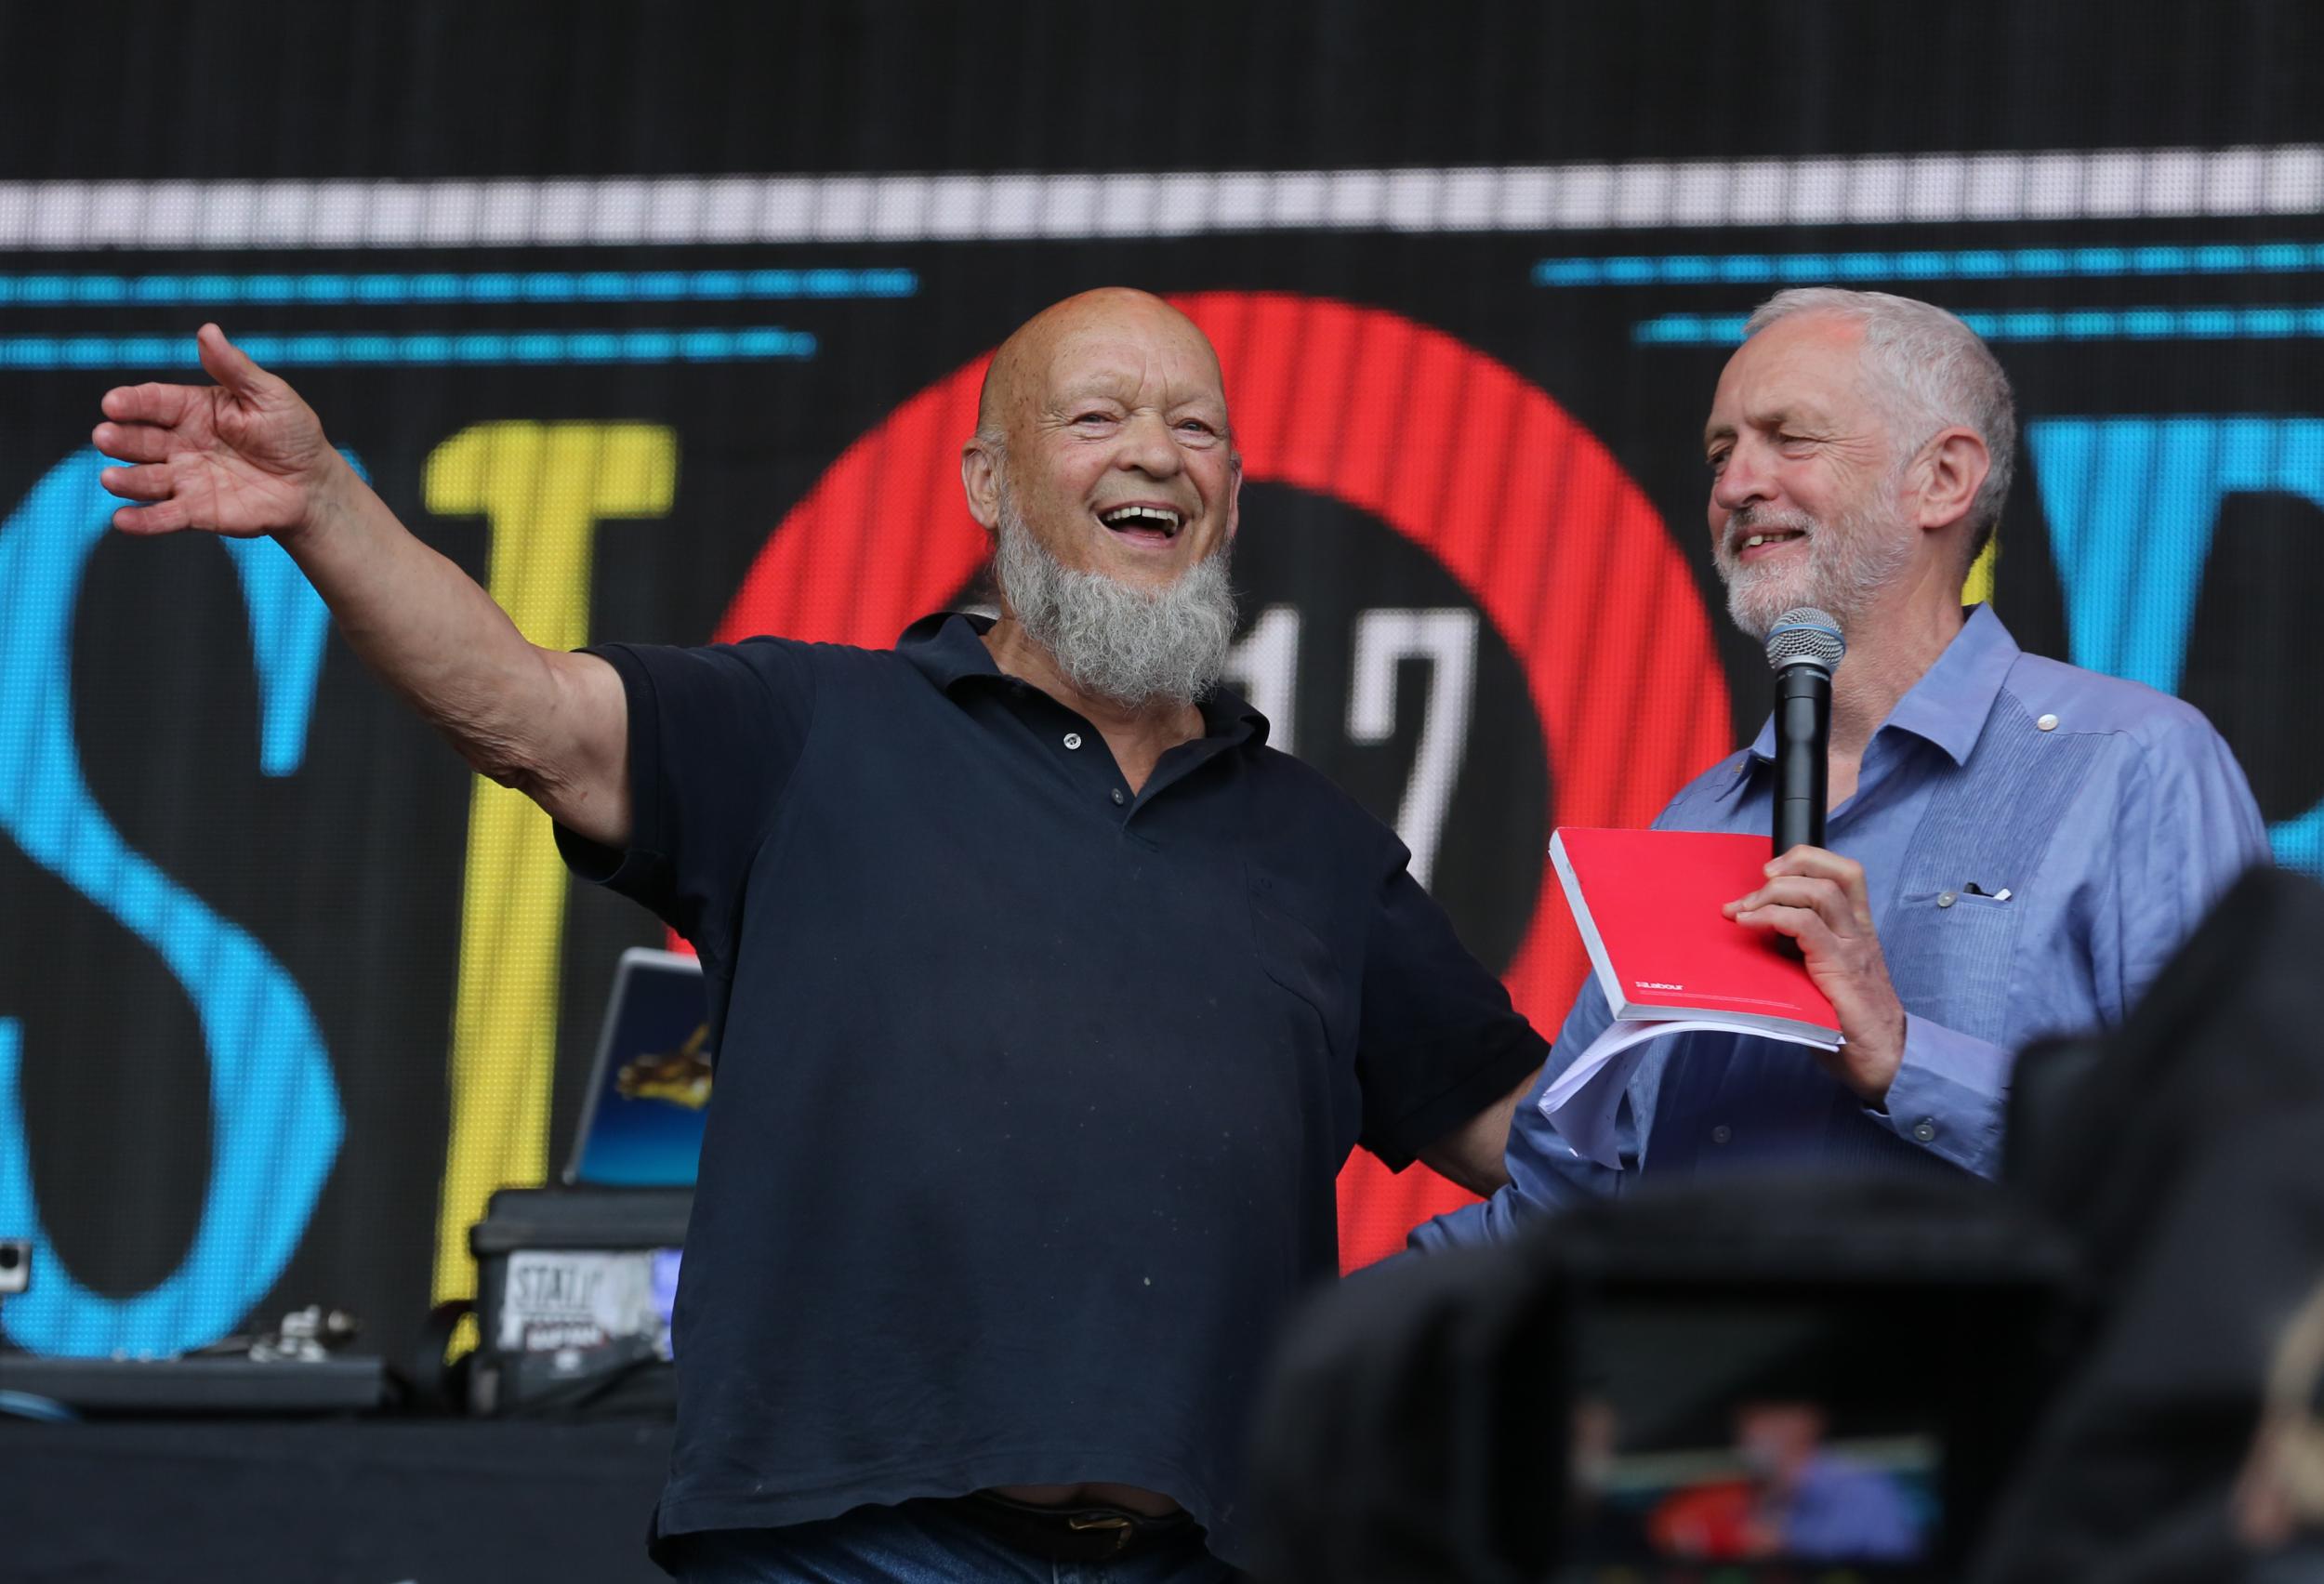 The Labour leader addressed crowds of tens of thousands at the Glastonbury Festival in the weeks after losing the general election